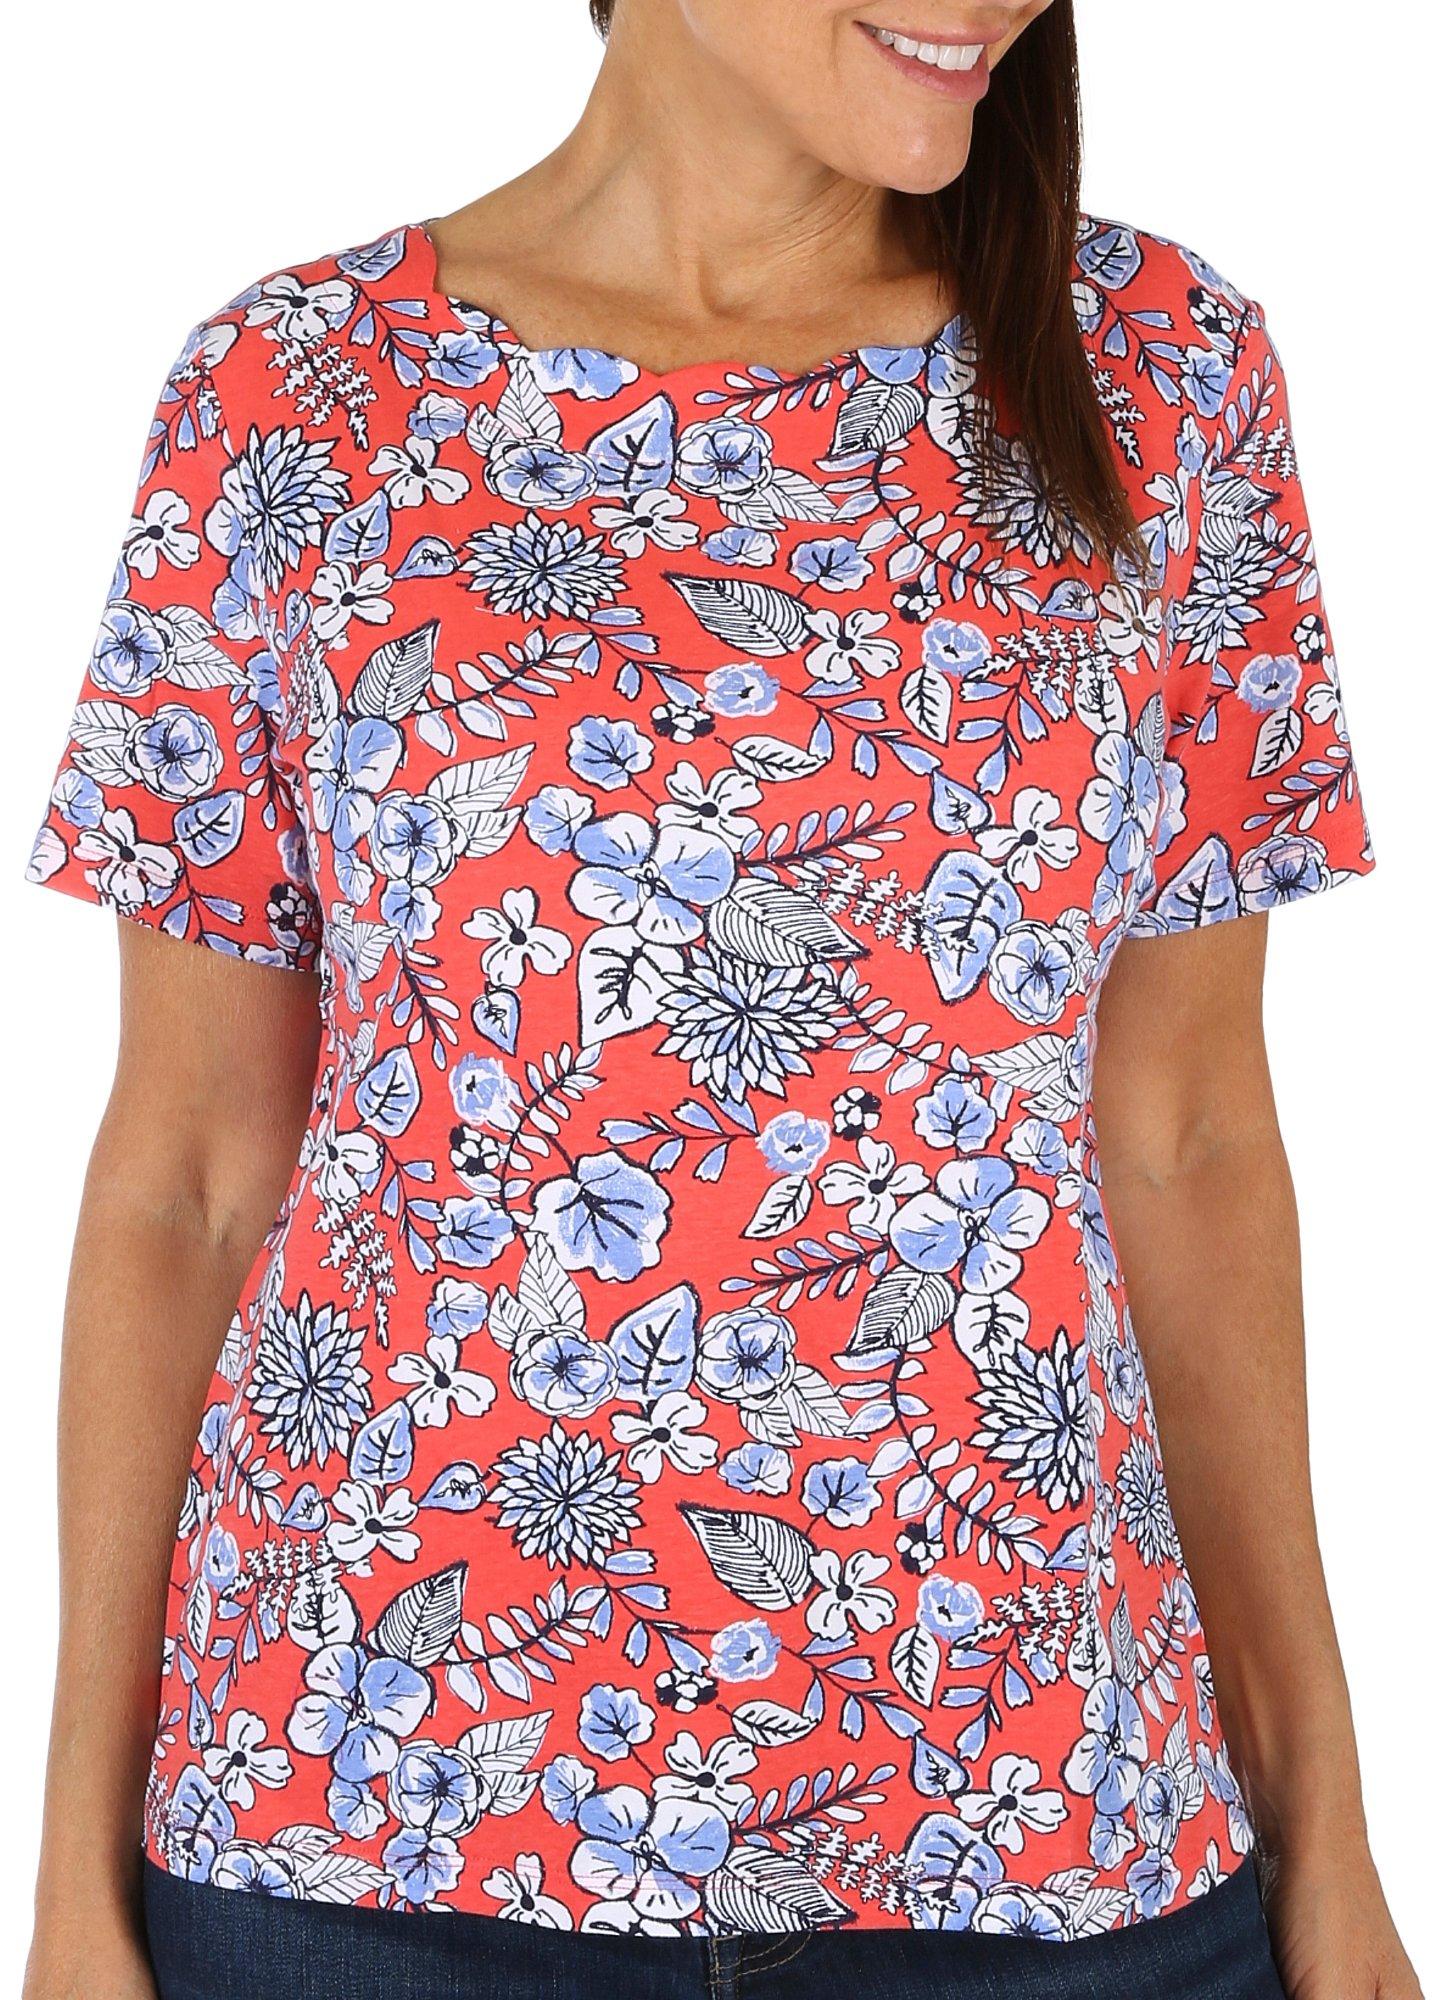 Womens Floral Print Scalloped Short Sleeve Top